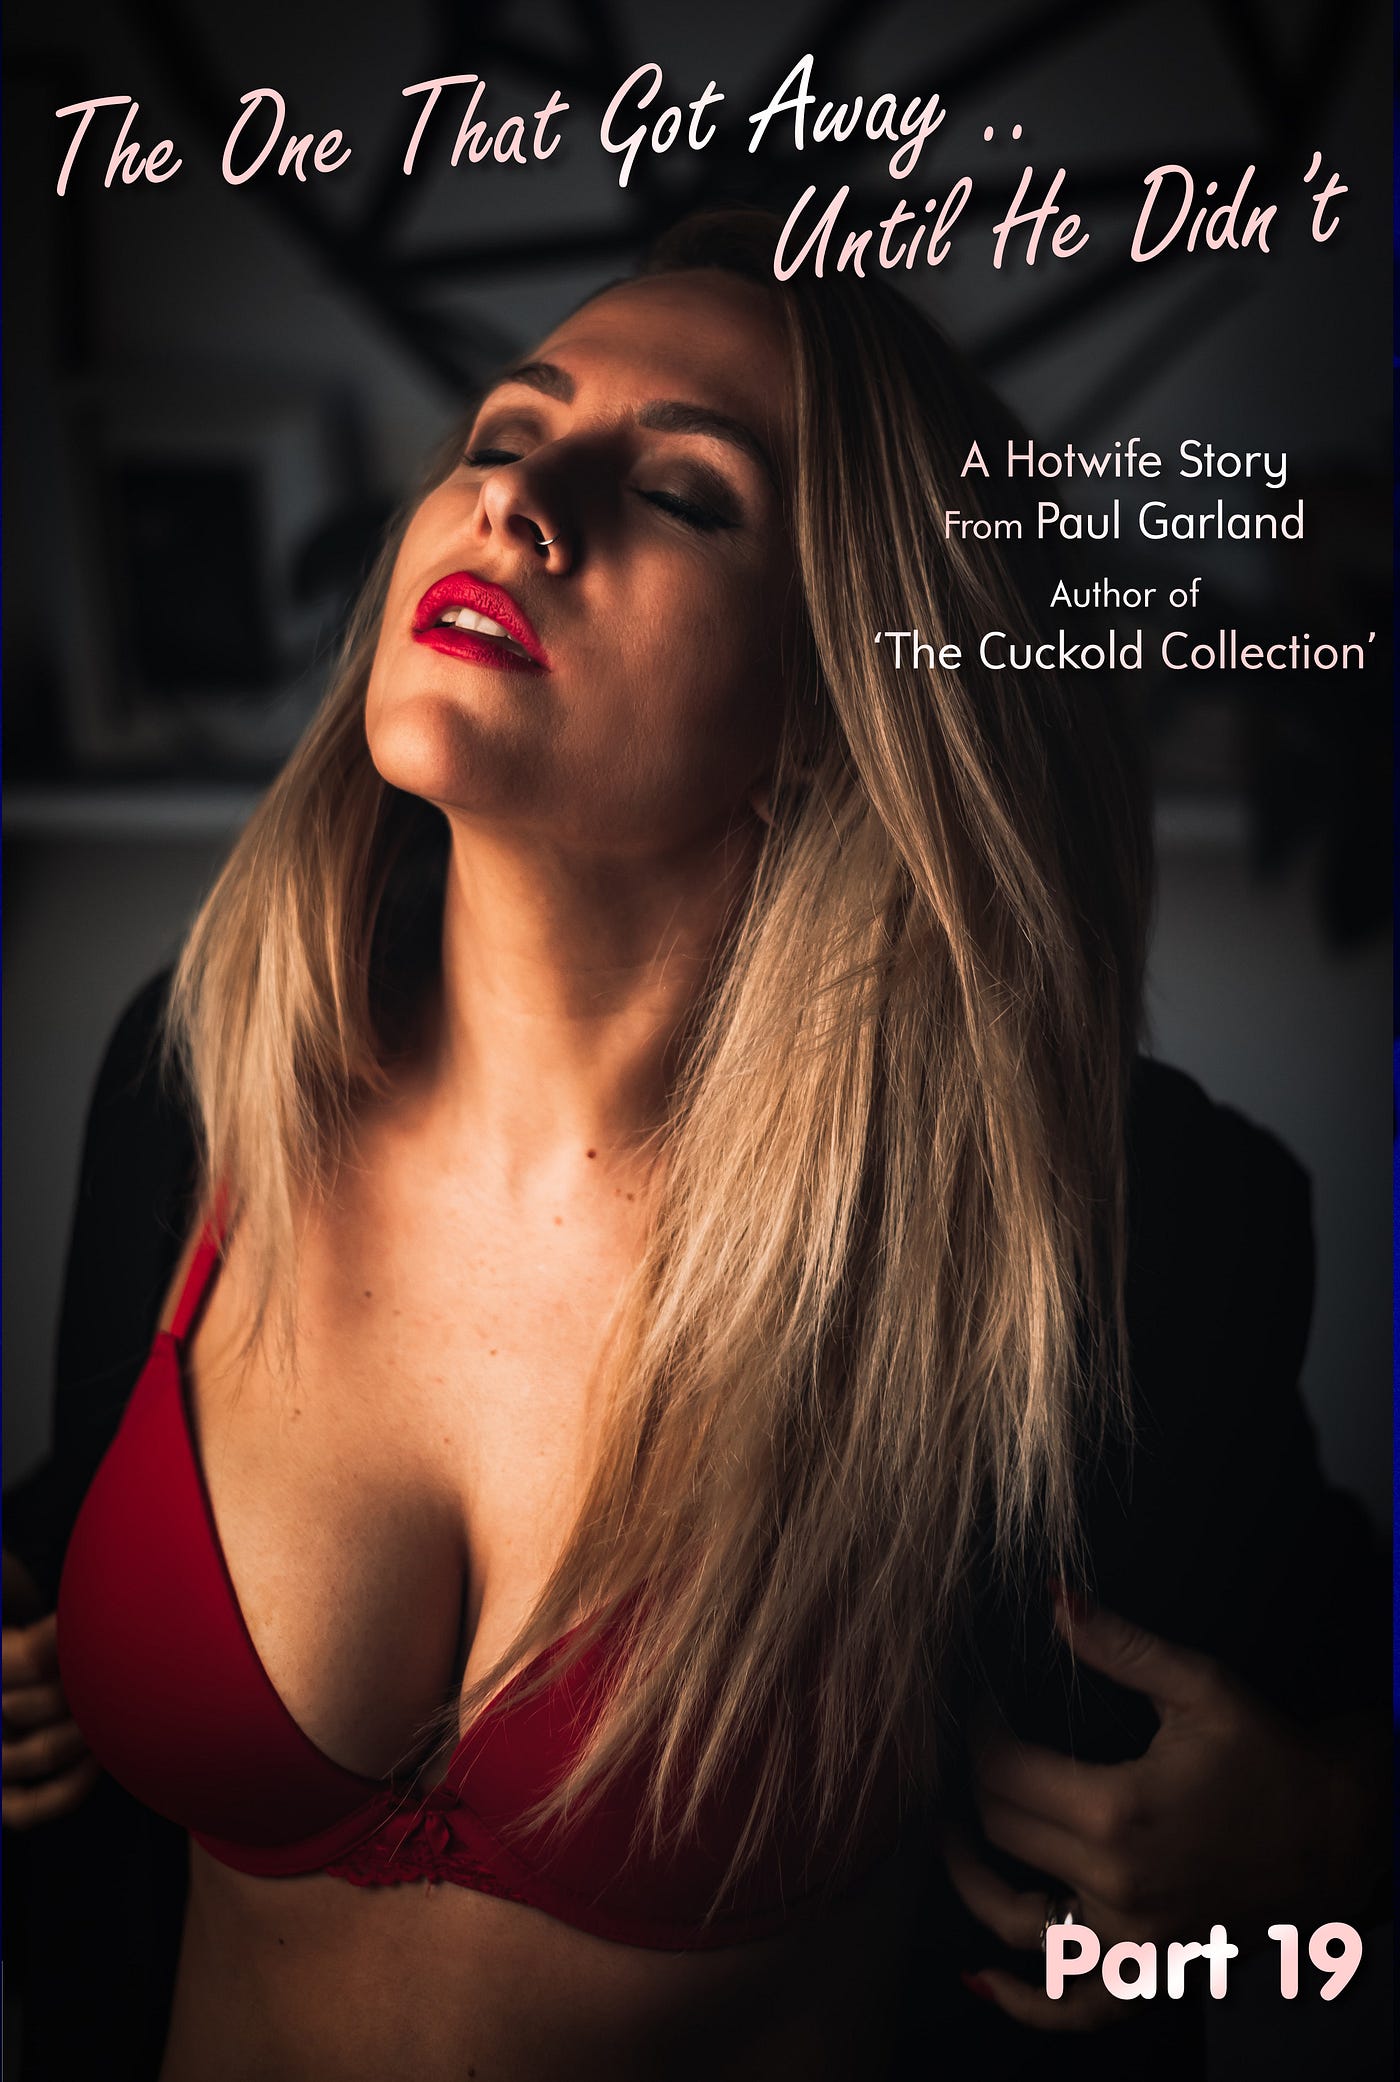 The One That Got Away… Until He Didnt Part 19 by Paul Garland ACHE (Authors of Cuckold and Hotwife Erotica) Medium